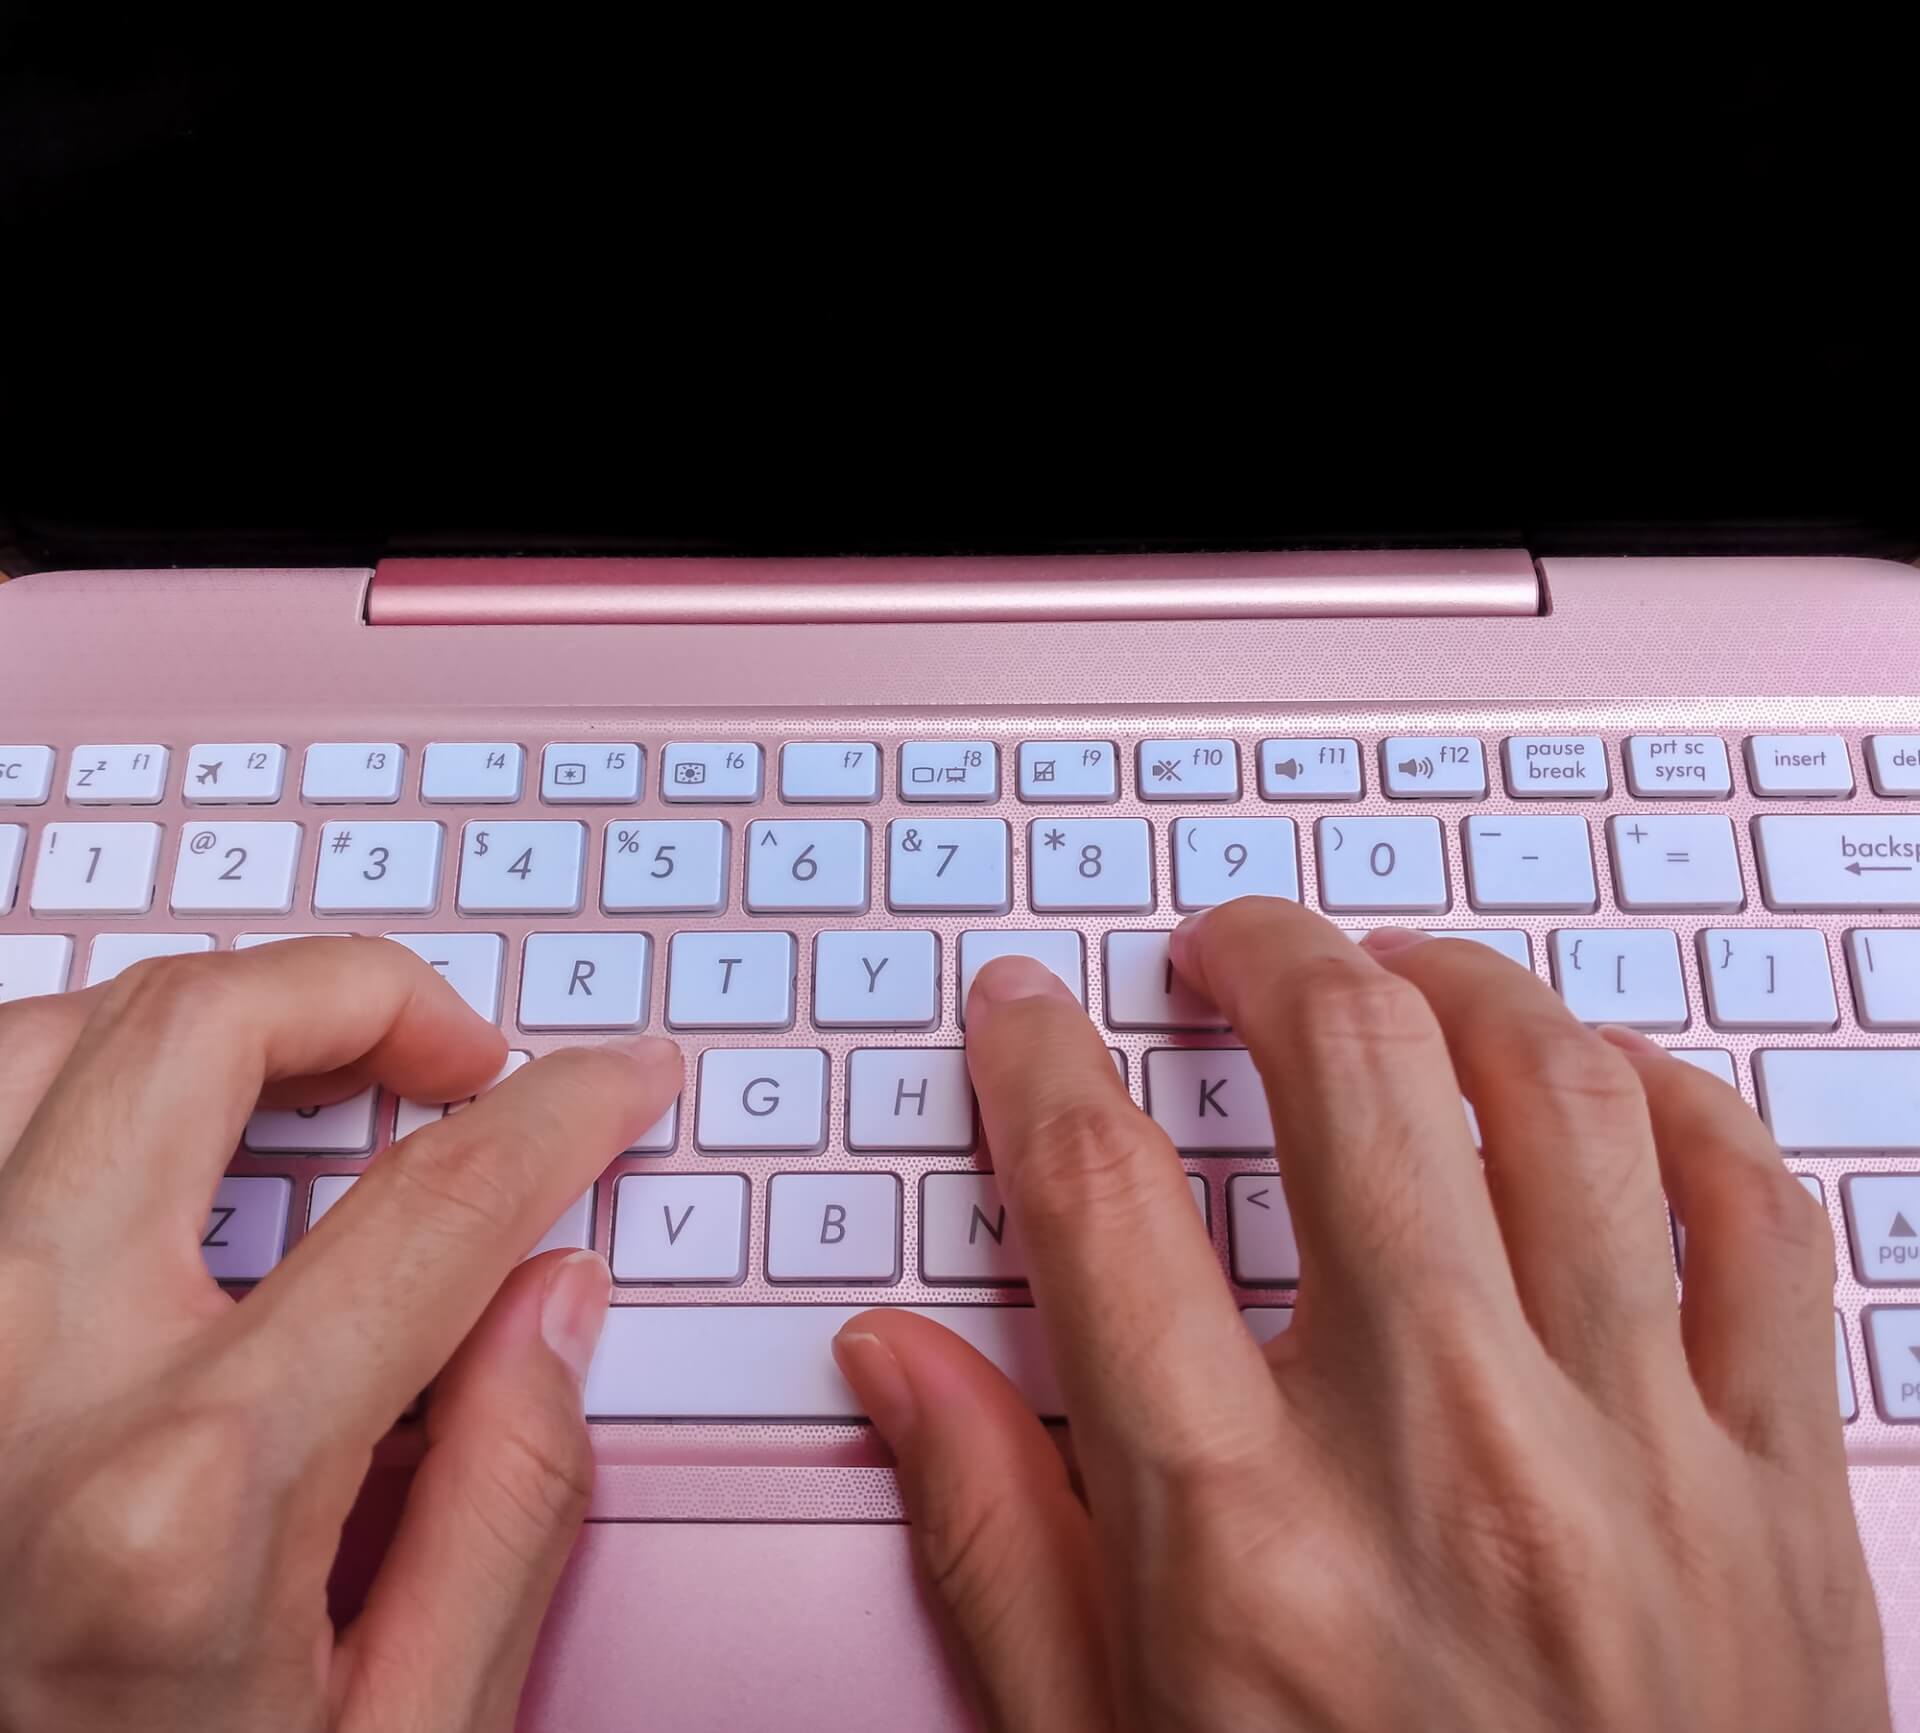 Using a computer by typing with the keyboard